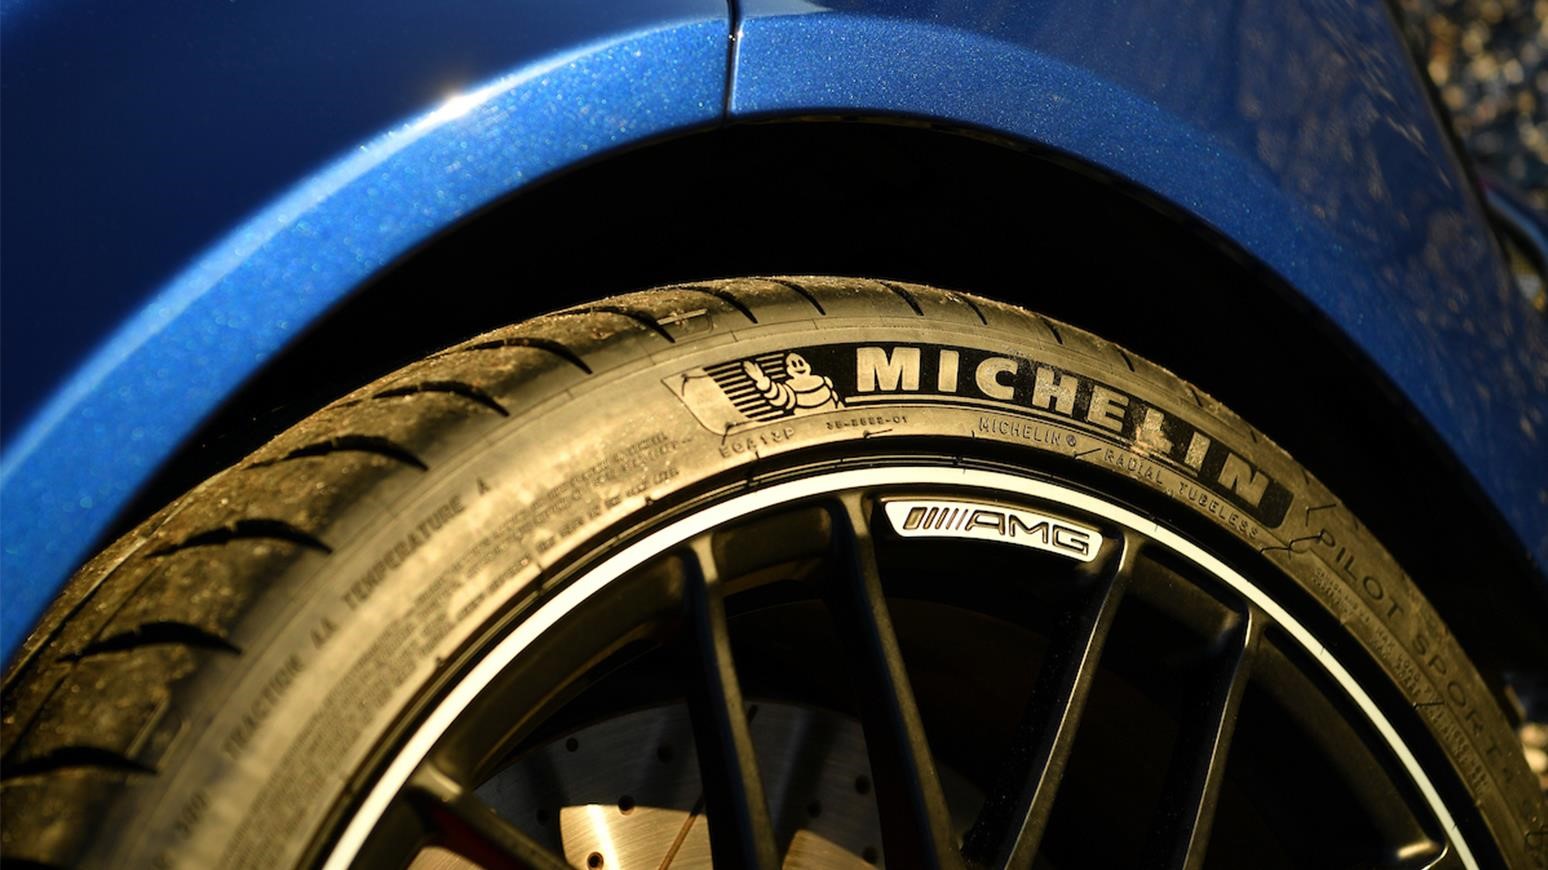 ADAC Study Finds Michelin Tyres Generate Fewest Particulates & Perform Safely